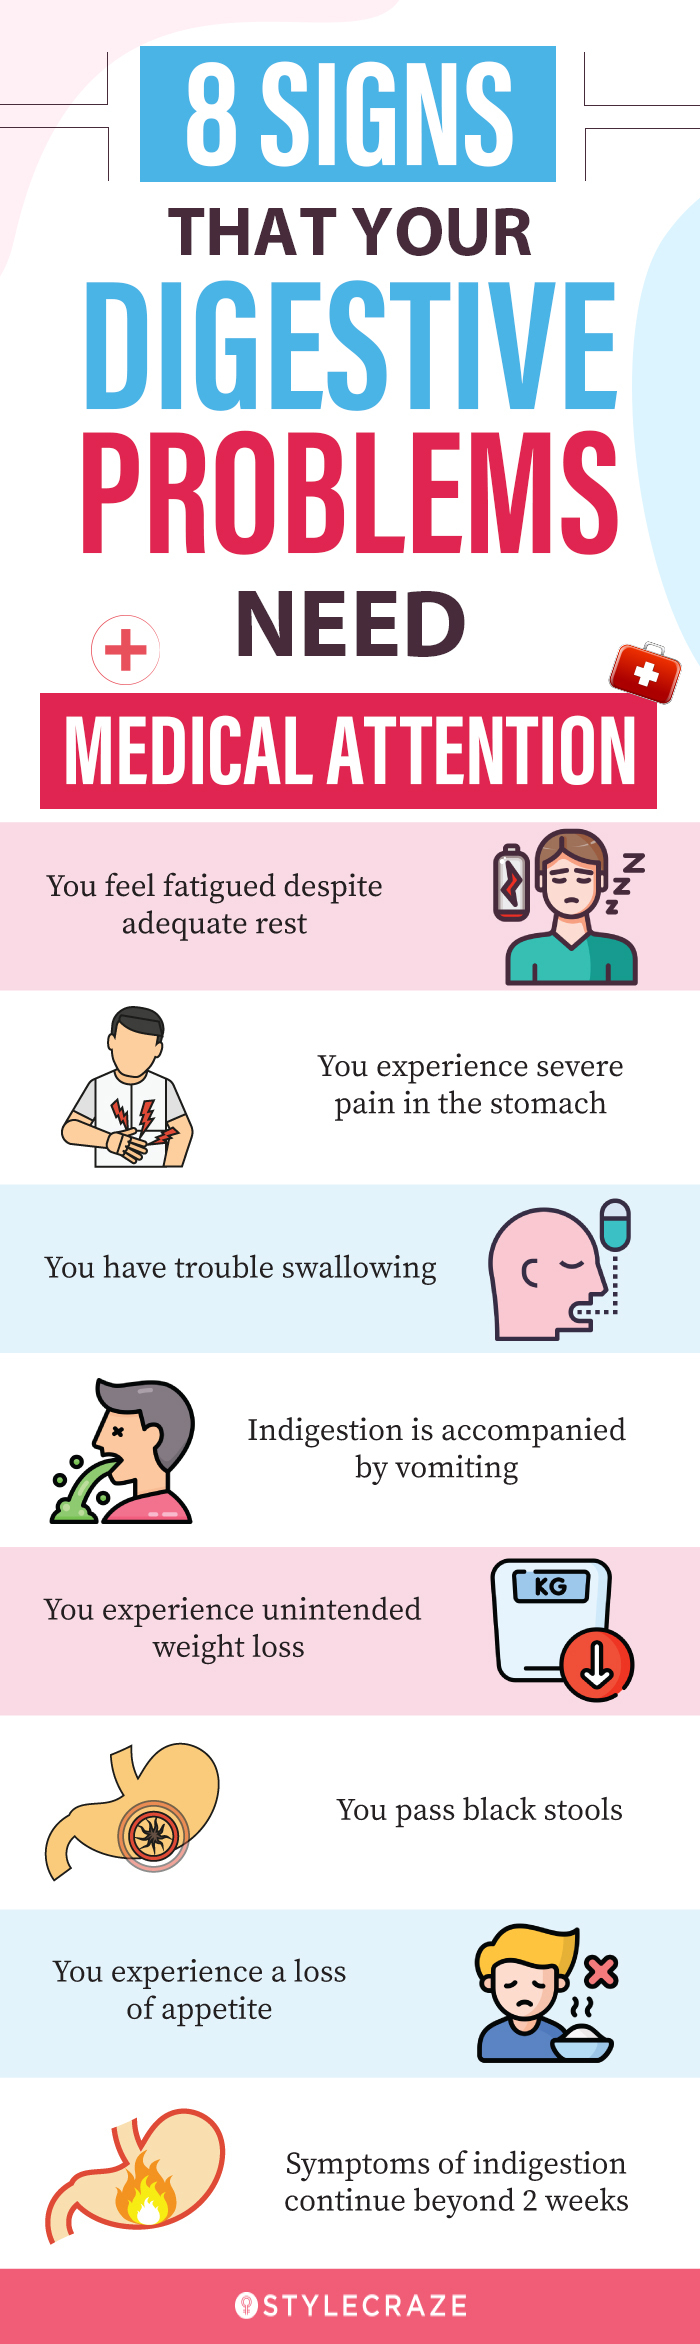 8 signs that your digestive problems need medical attention (infographic)